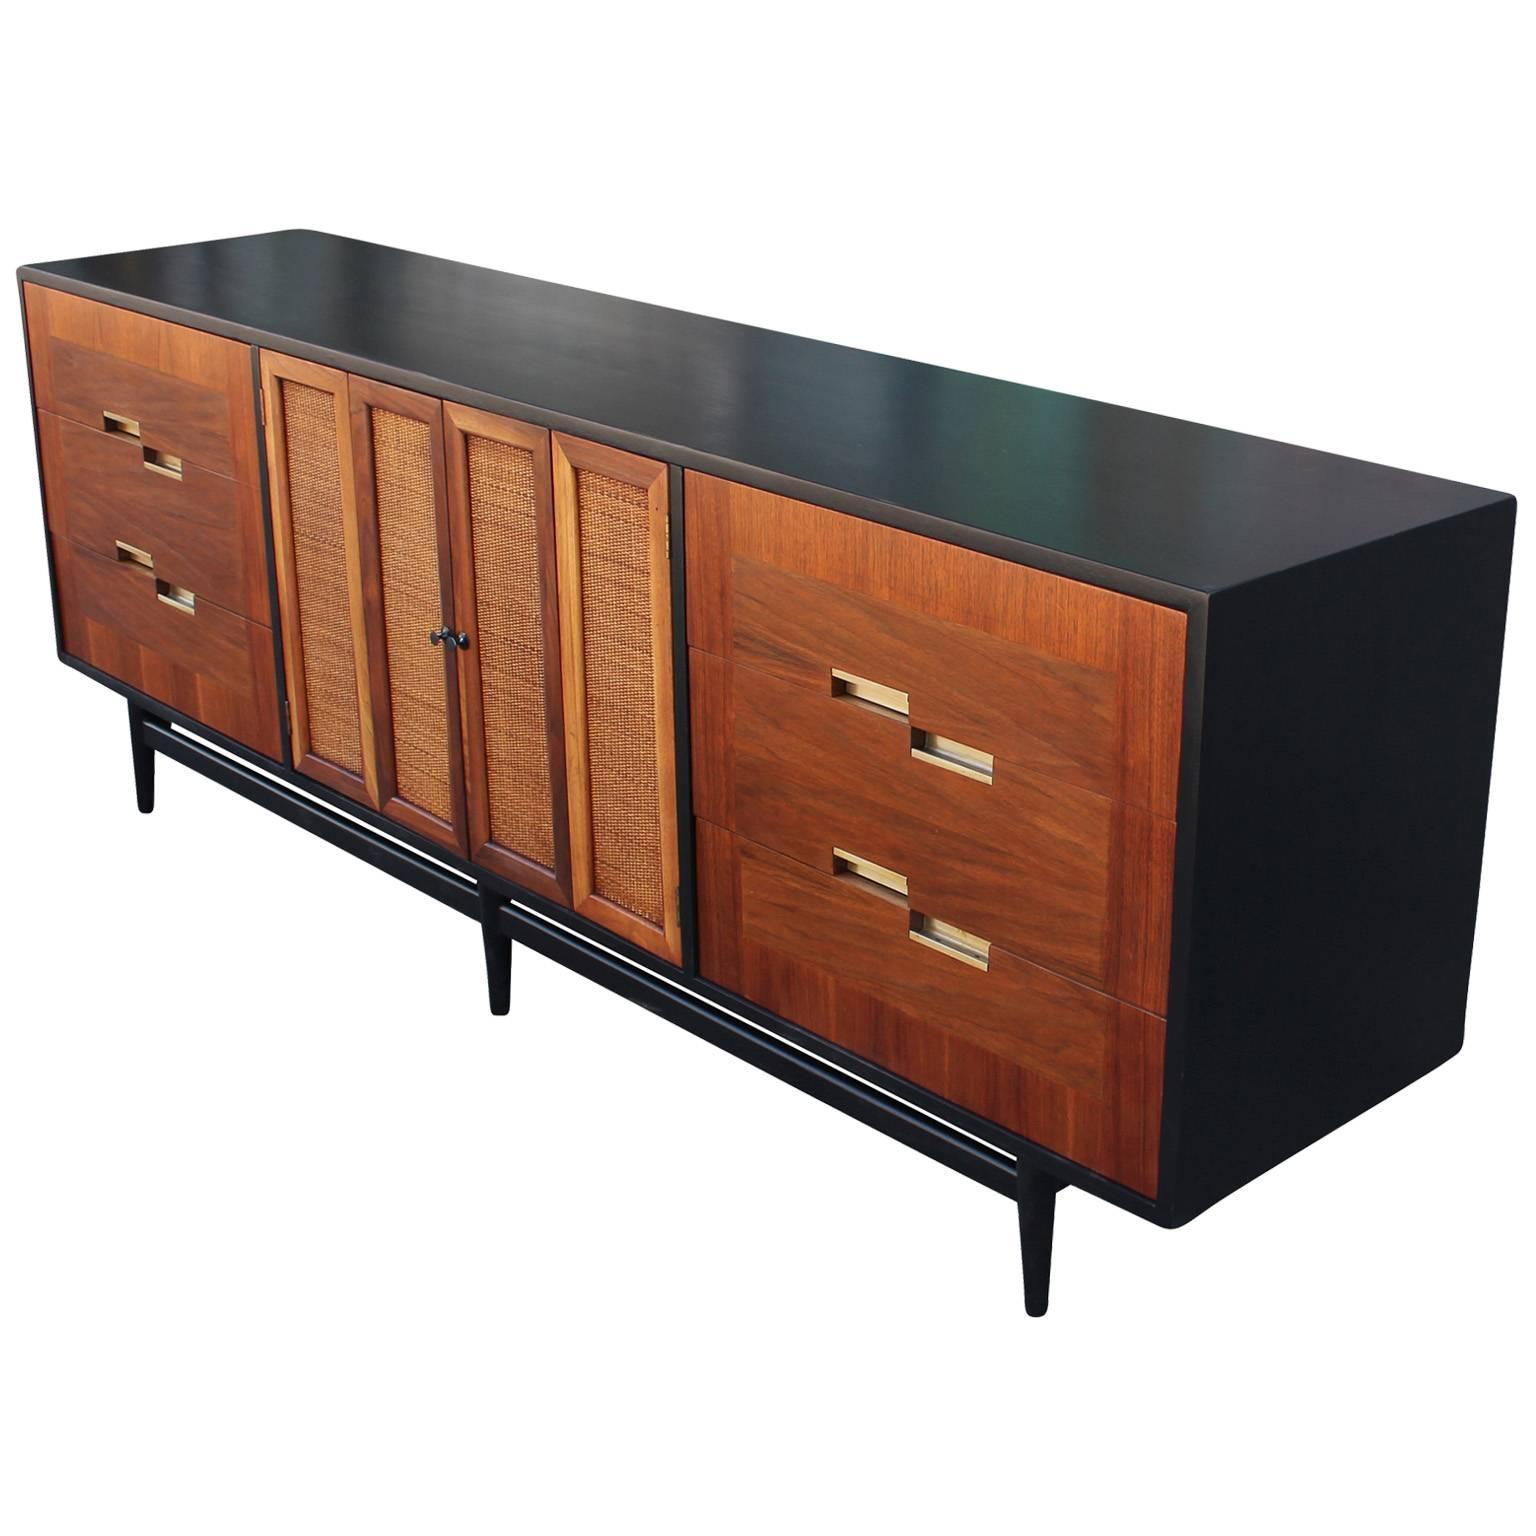 Excellent long and low dresser by American of Martinsville. Case is finished in ebony and drawer fronts in a medium walnut. Three drawers with alternating brass hardware on either side. Raffia front bi-fold doors open to three drawers. An airy base